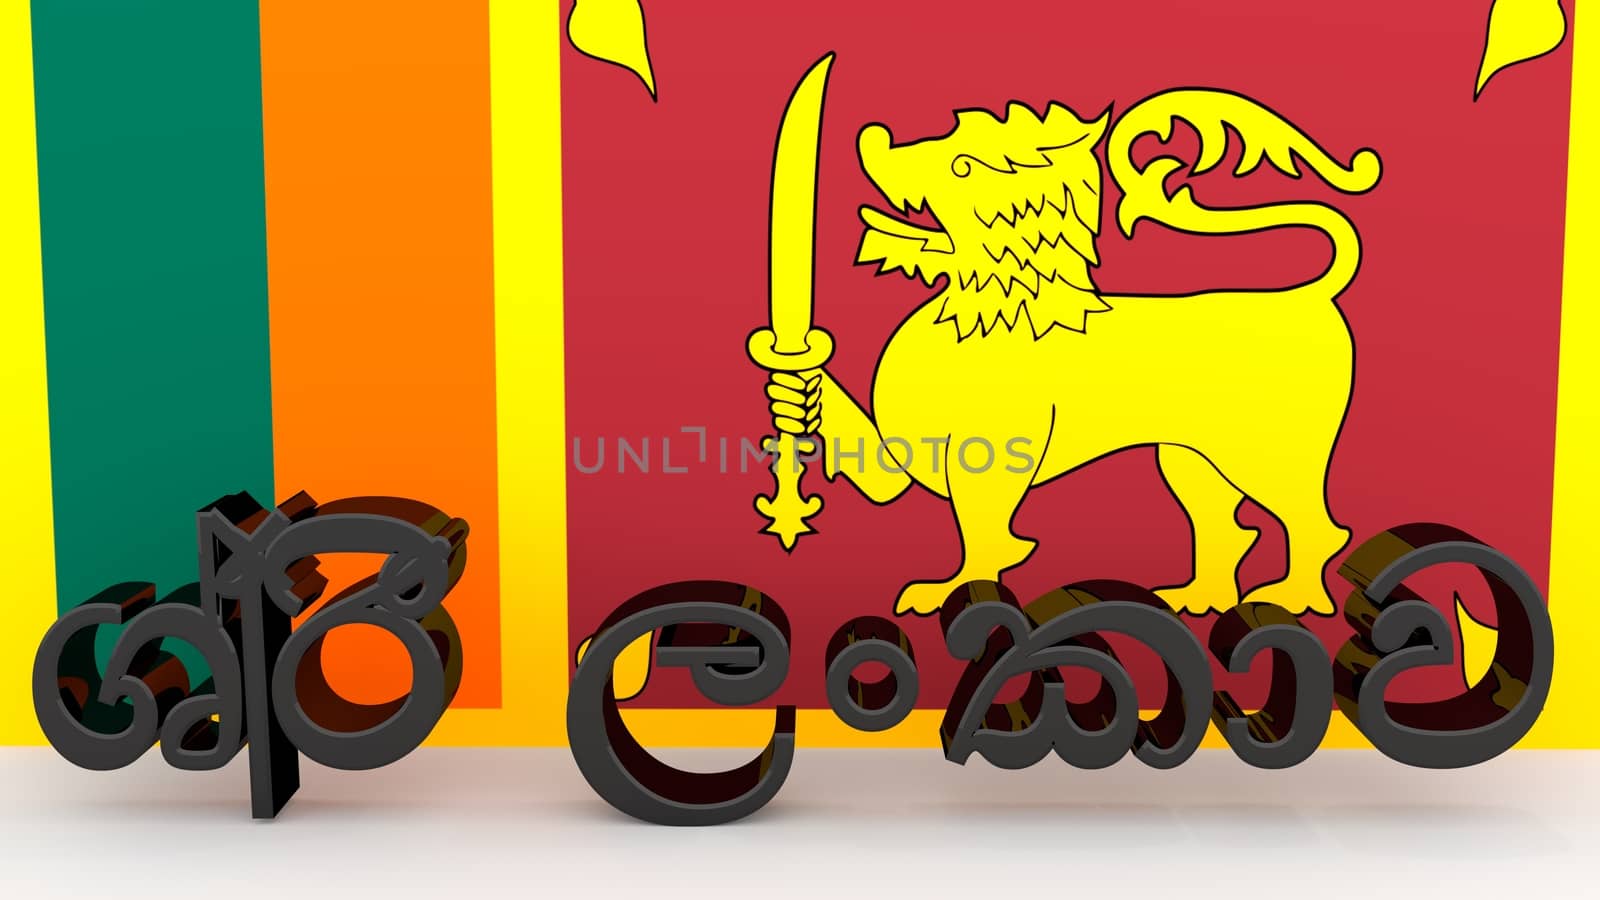 Sinhalese characters made of dark metal meaning Sri Lanka in front of a Sri Lankan flag